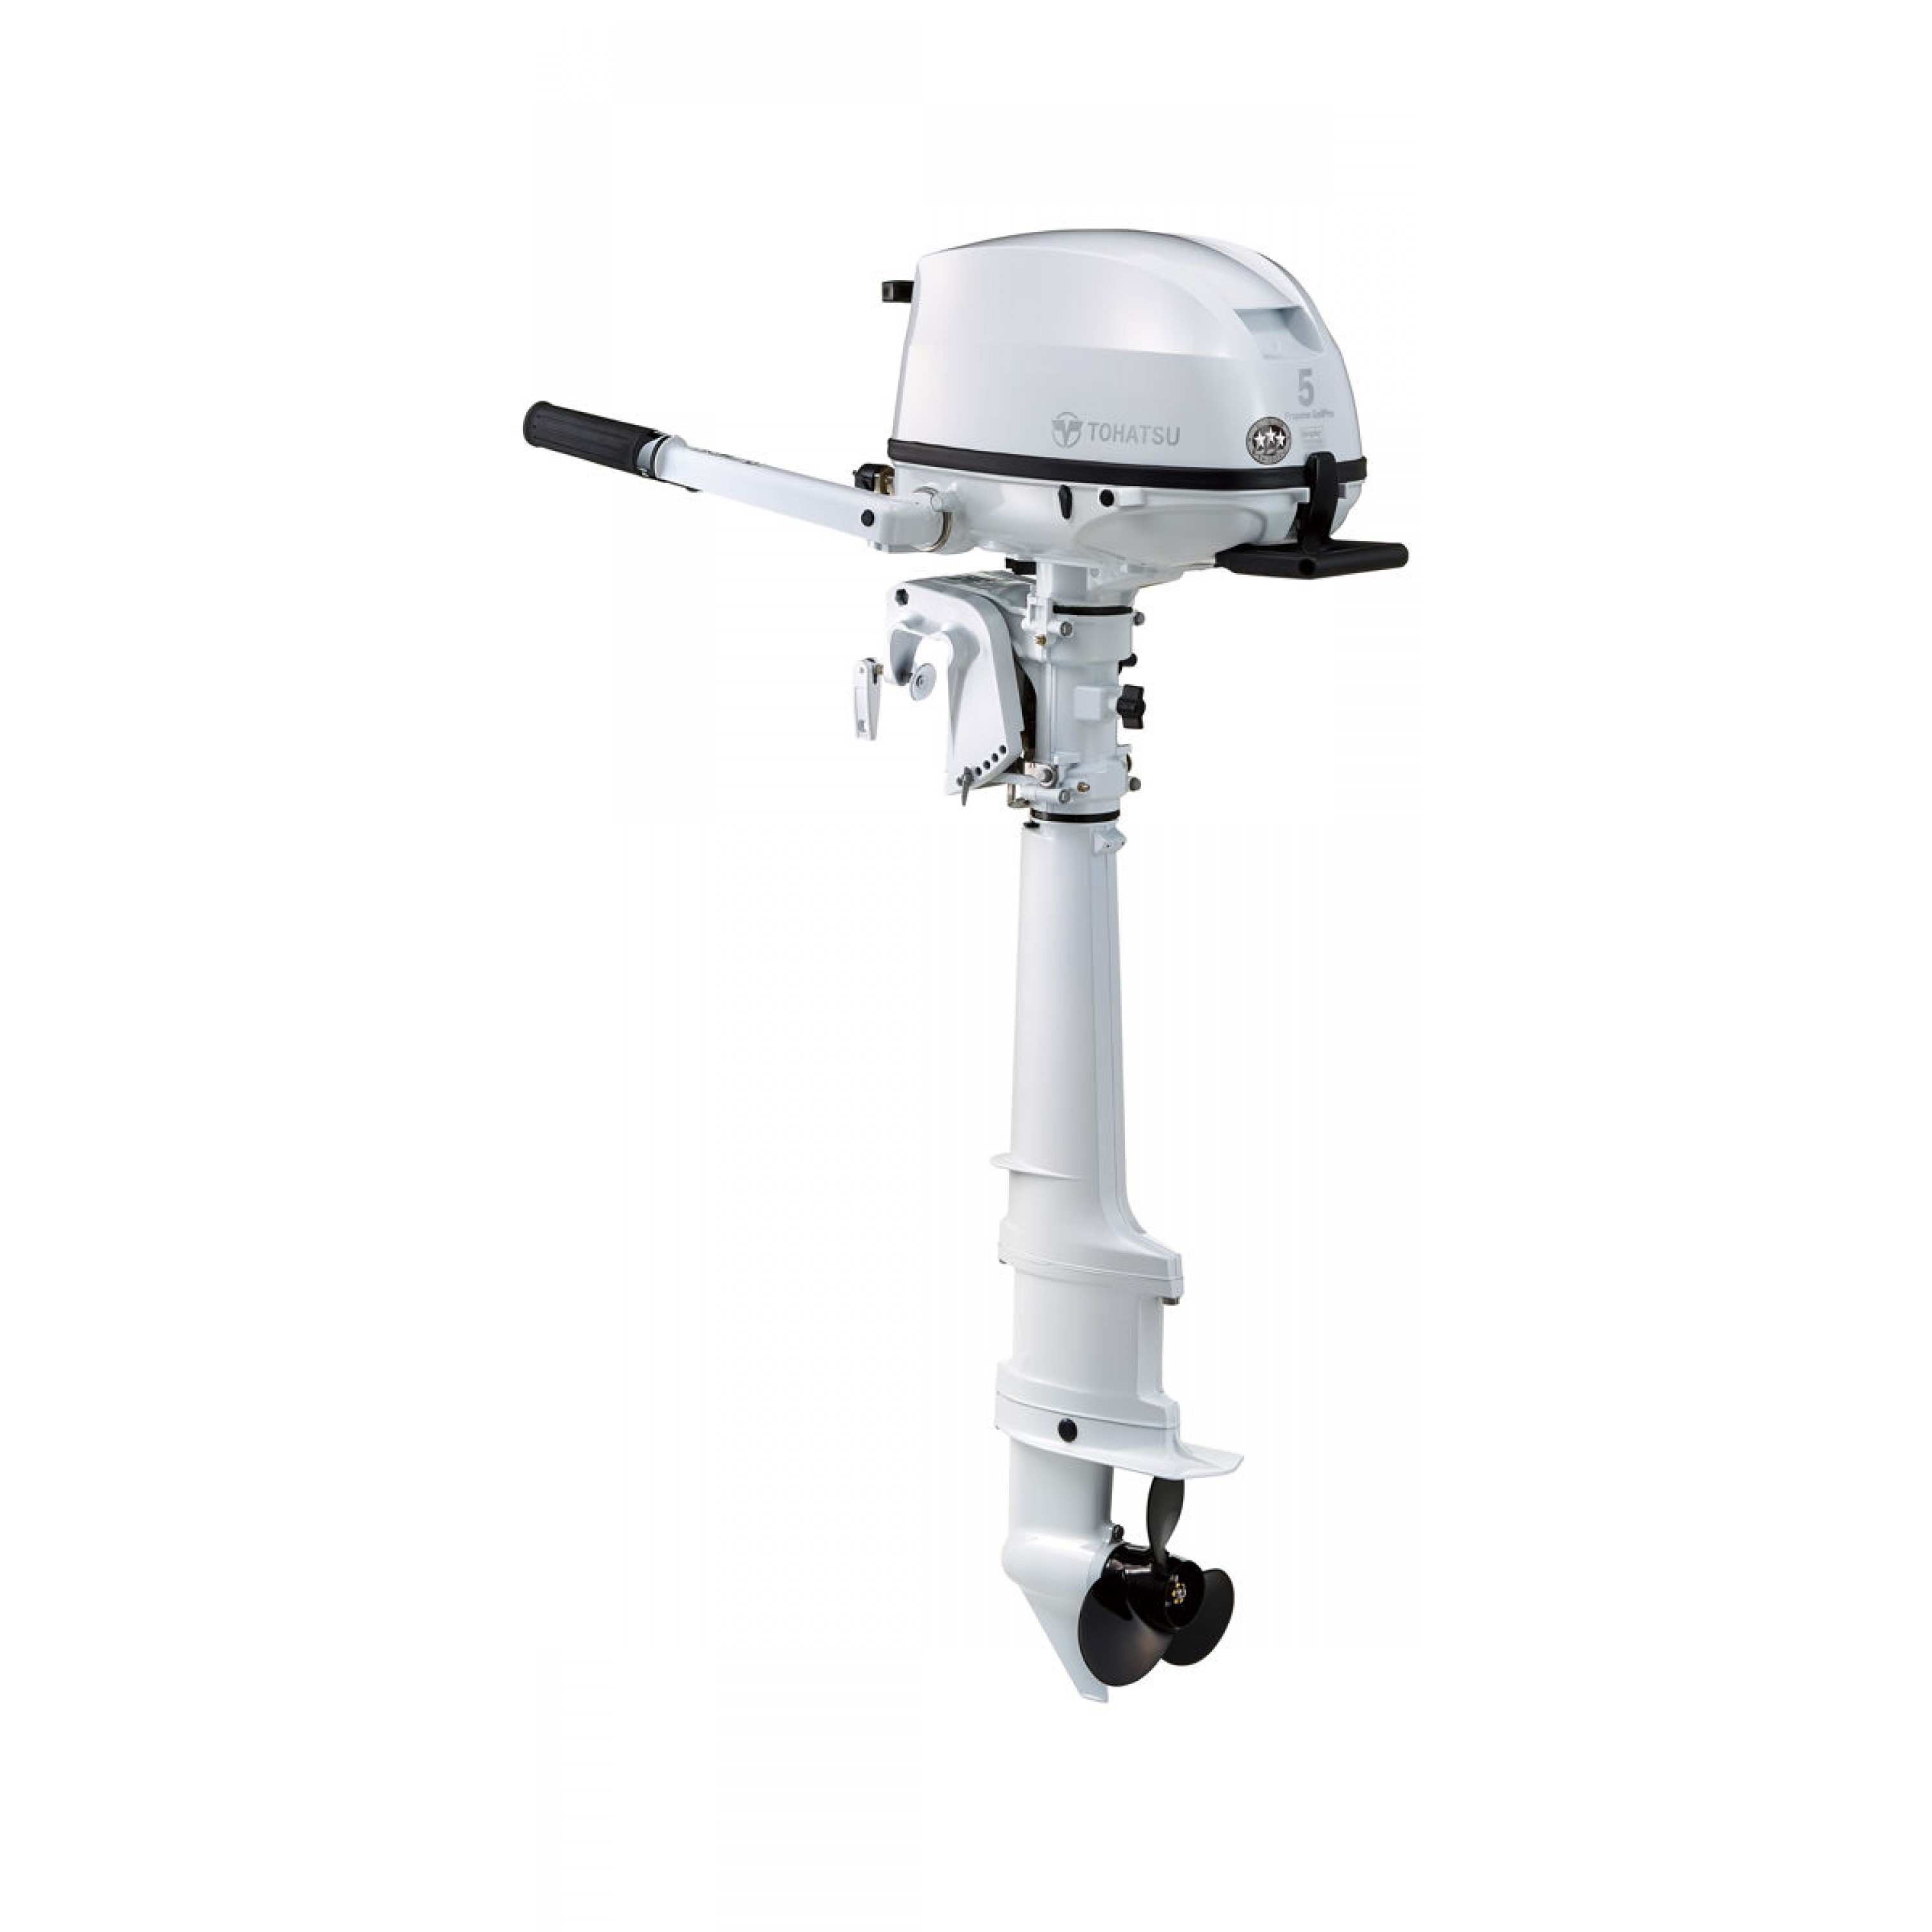 5 HP, TOHATSU OUTBOARD, MFS5DLPGSPROUL (White)  (incudes LPG tank), WHITE, CARB, 25, TILLER, LPG TANK INC, MANUAL START, 12v CHARGE